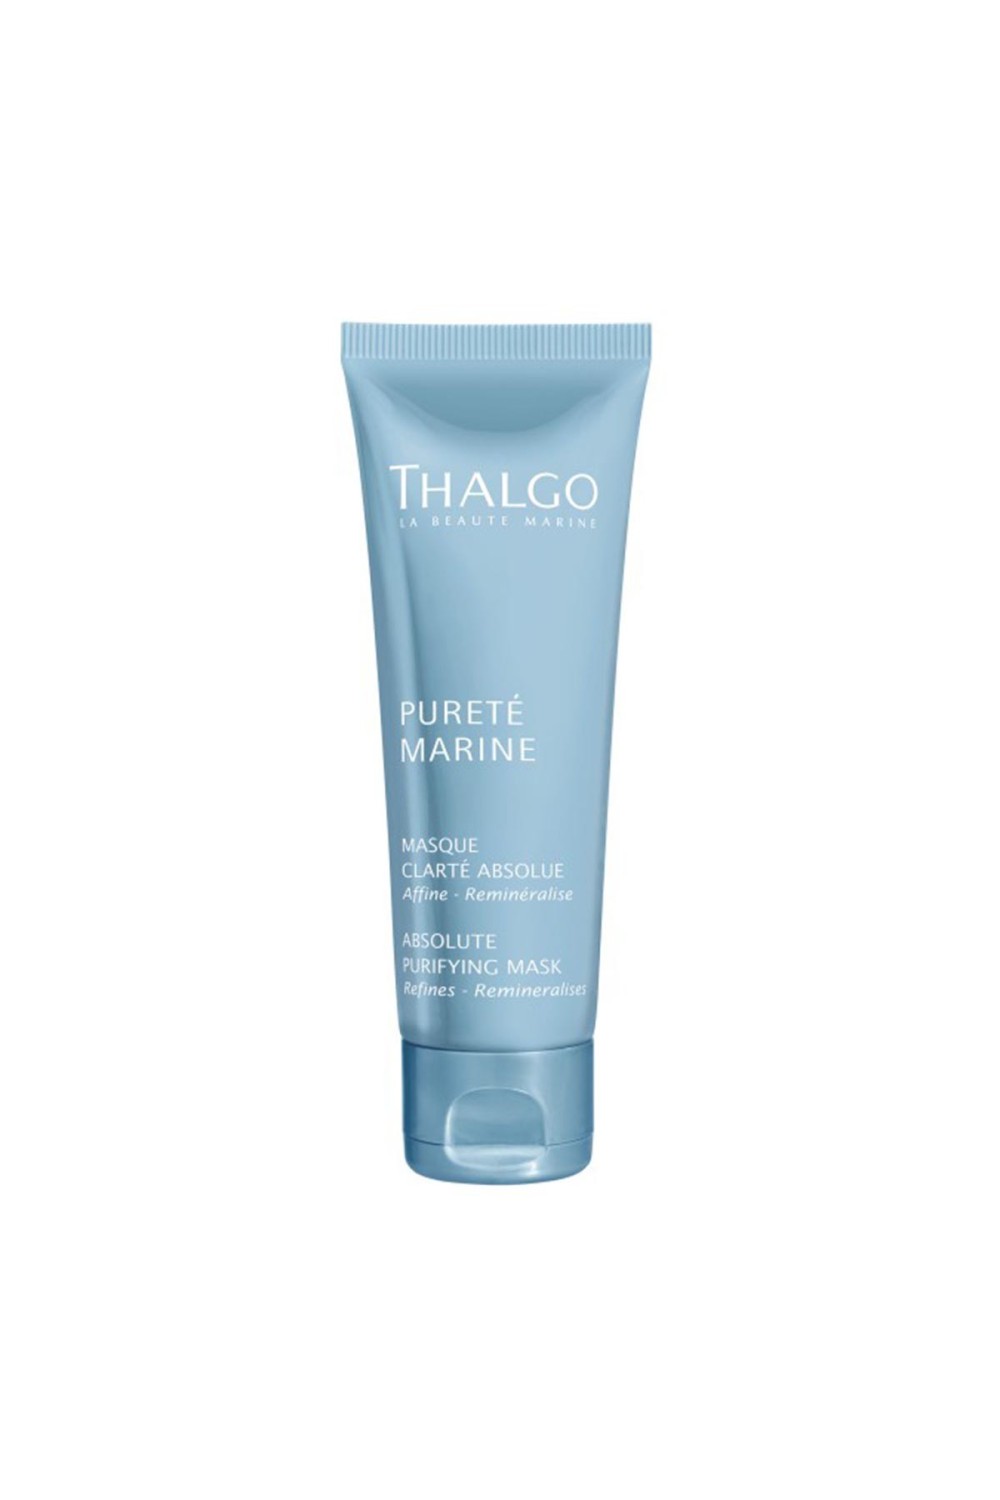 Thalgo Absolute Purifying Mask 50ml